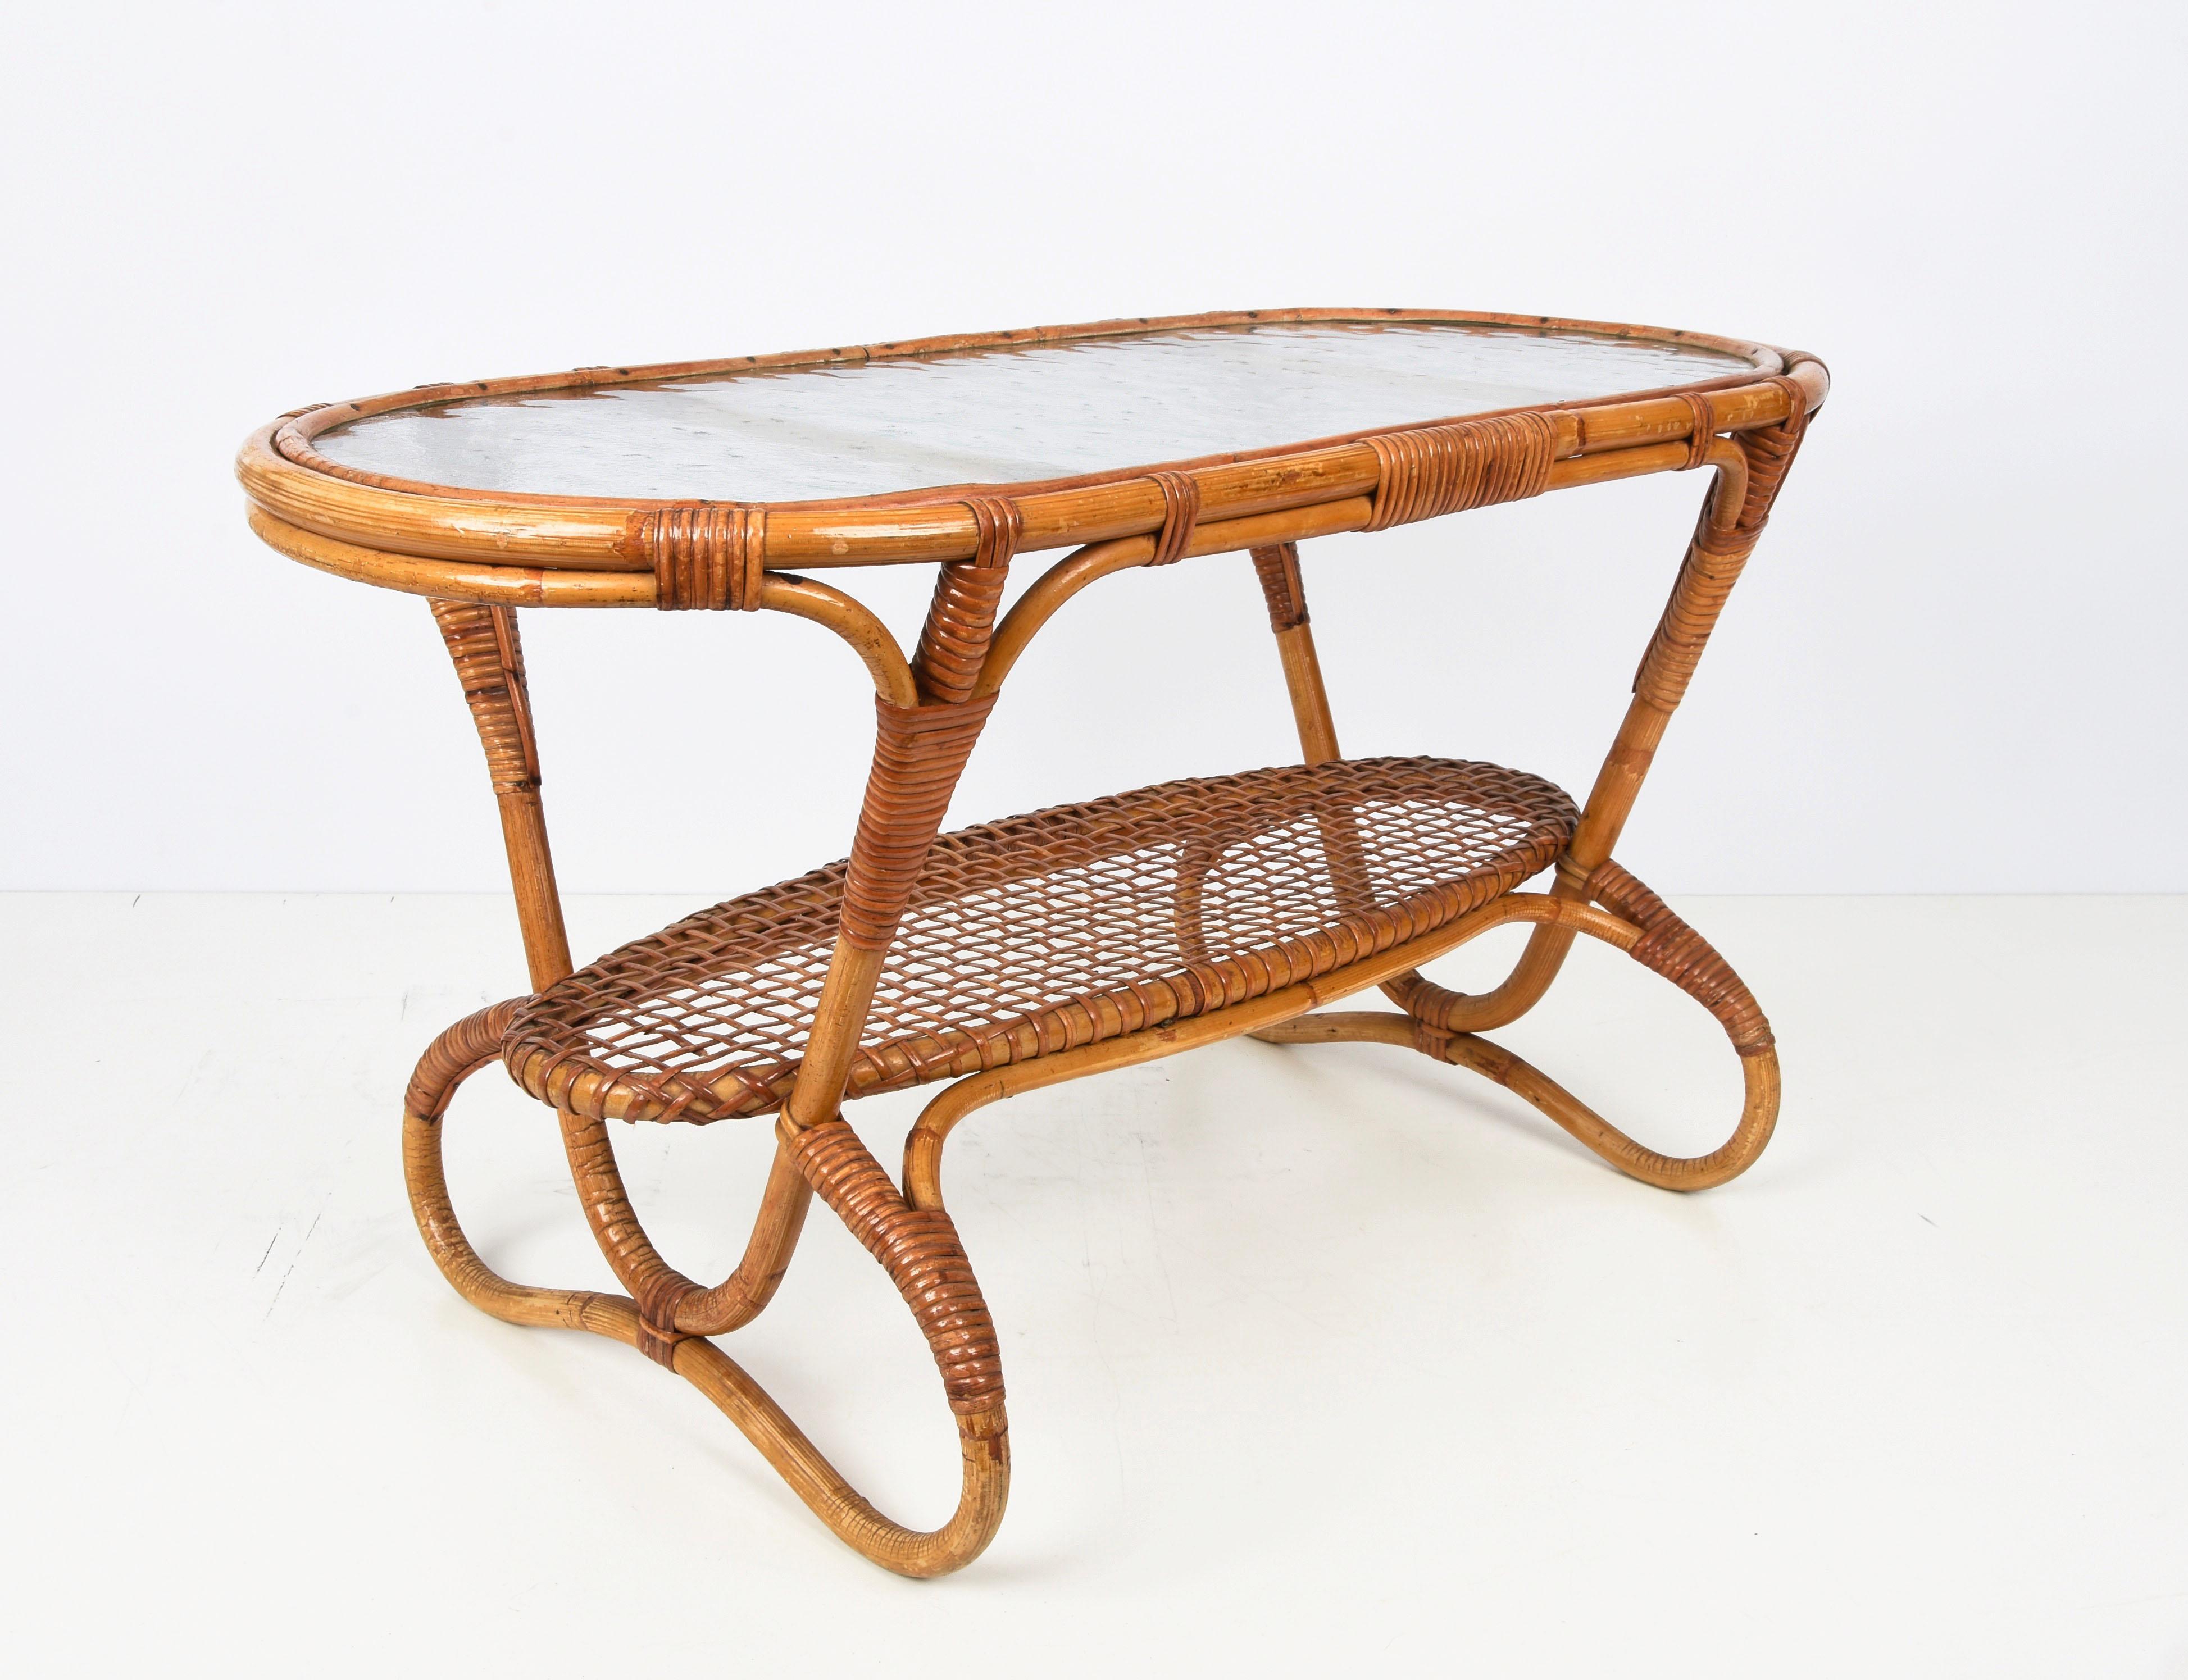 Midcentury Oval Rattan and Bamboo Dutch Coffee Table with Glass Top, 1950s For Sale 5